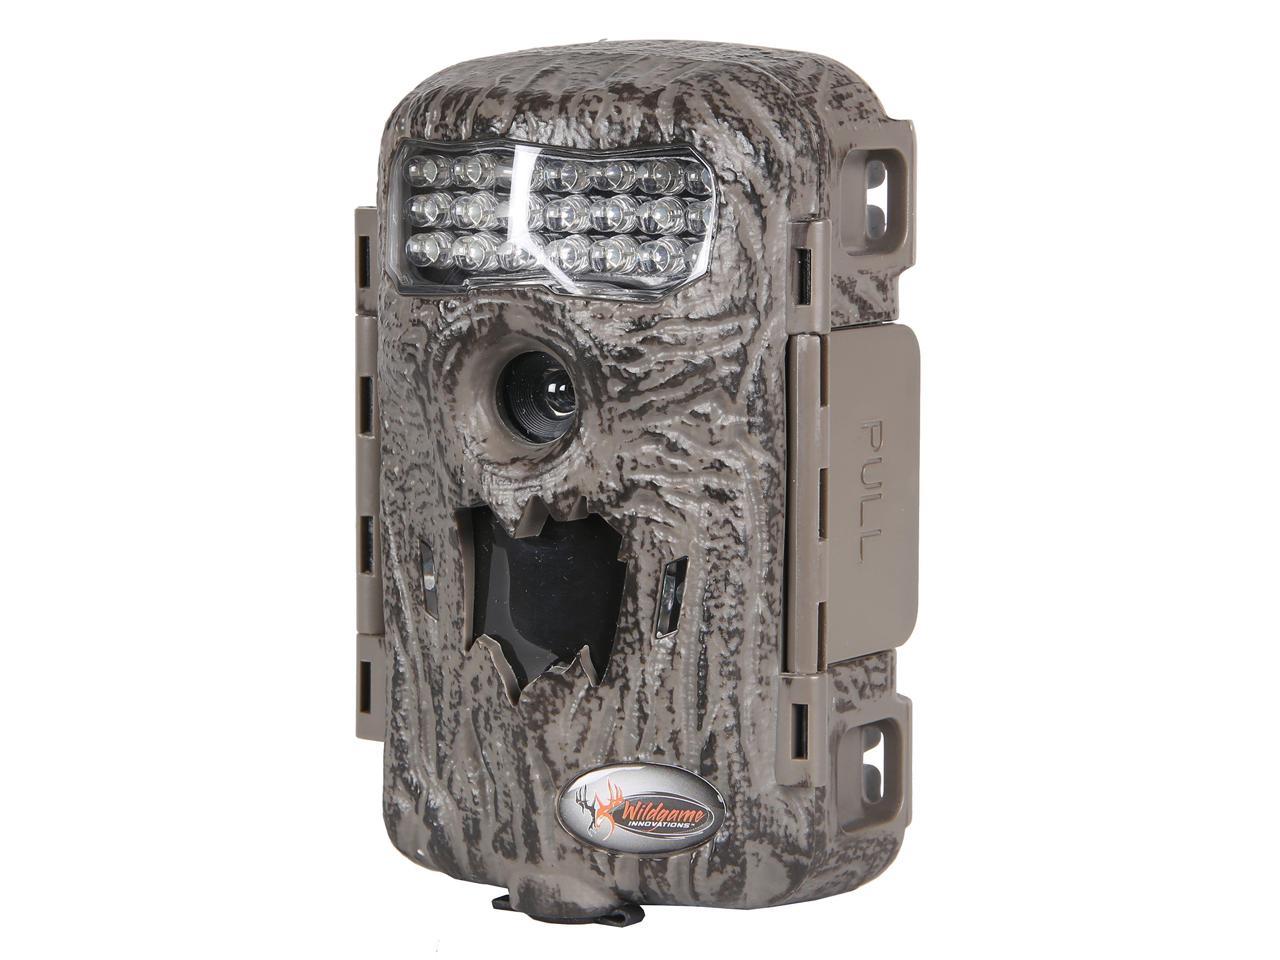 wild game innovations camera review